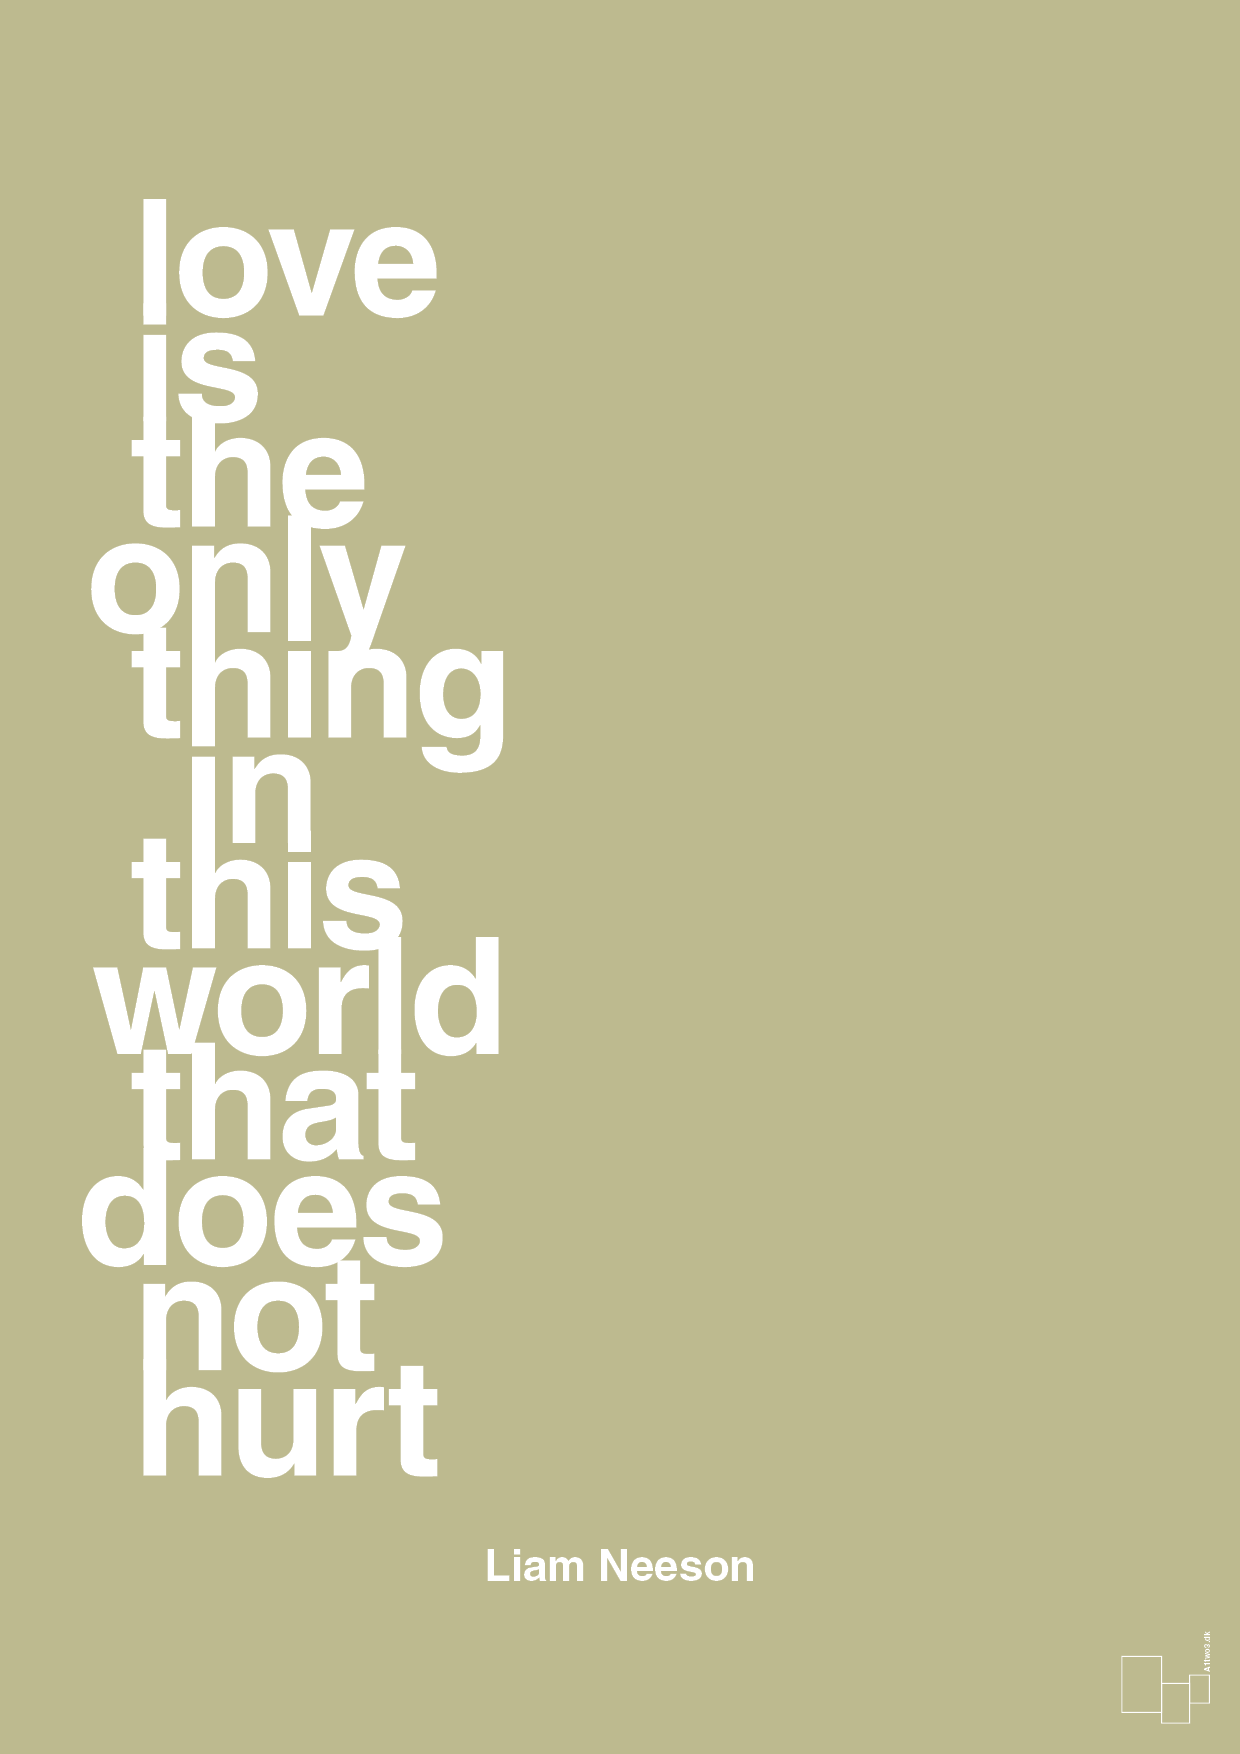 love is the only thing in this world that does not hurt - Plakat med Citater i Back to Nature